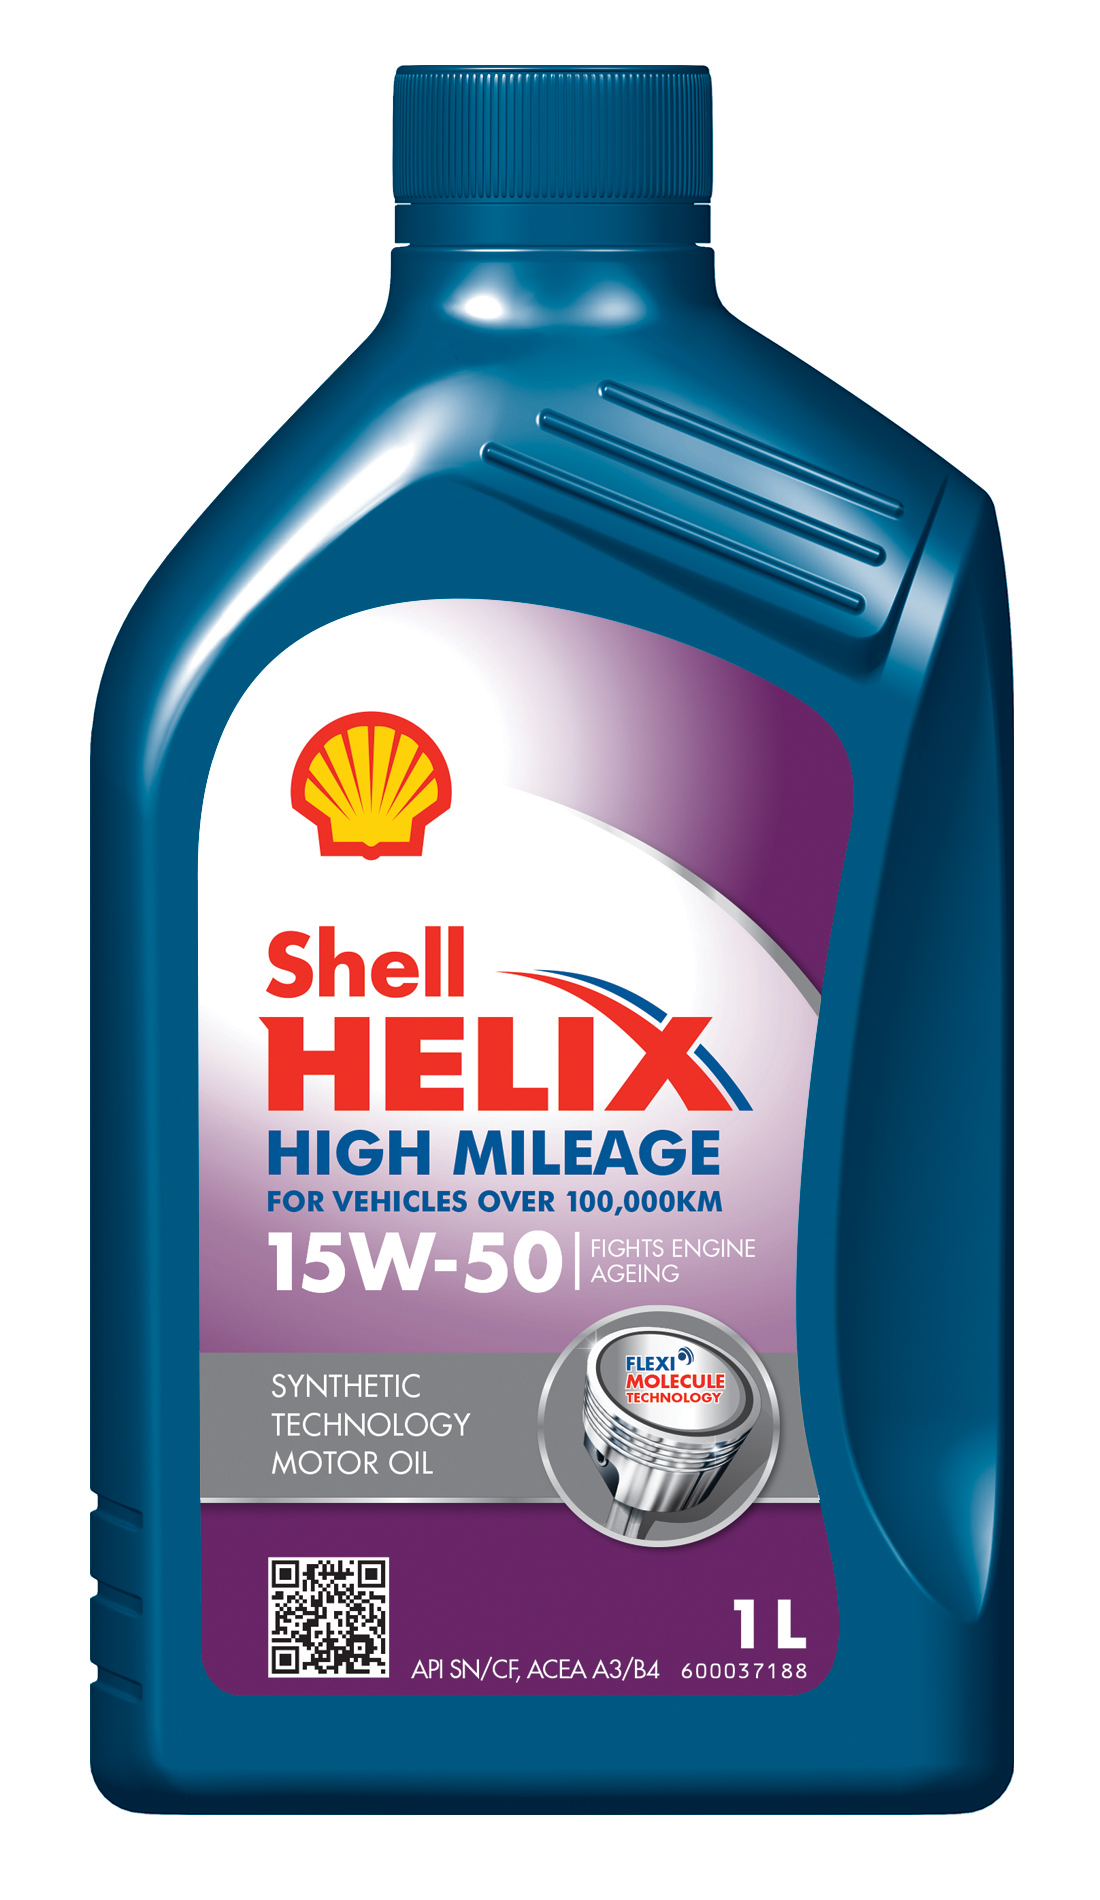 Shell helix high mileage. Шелл Хеликс High Mileage. Shell Helix Mileage.